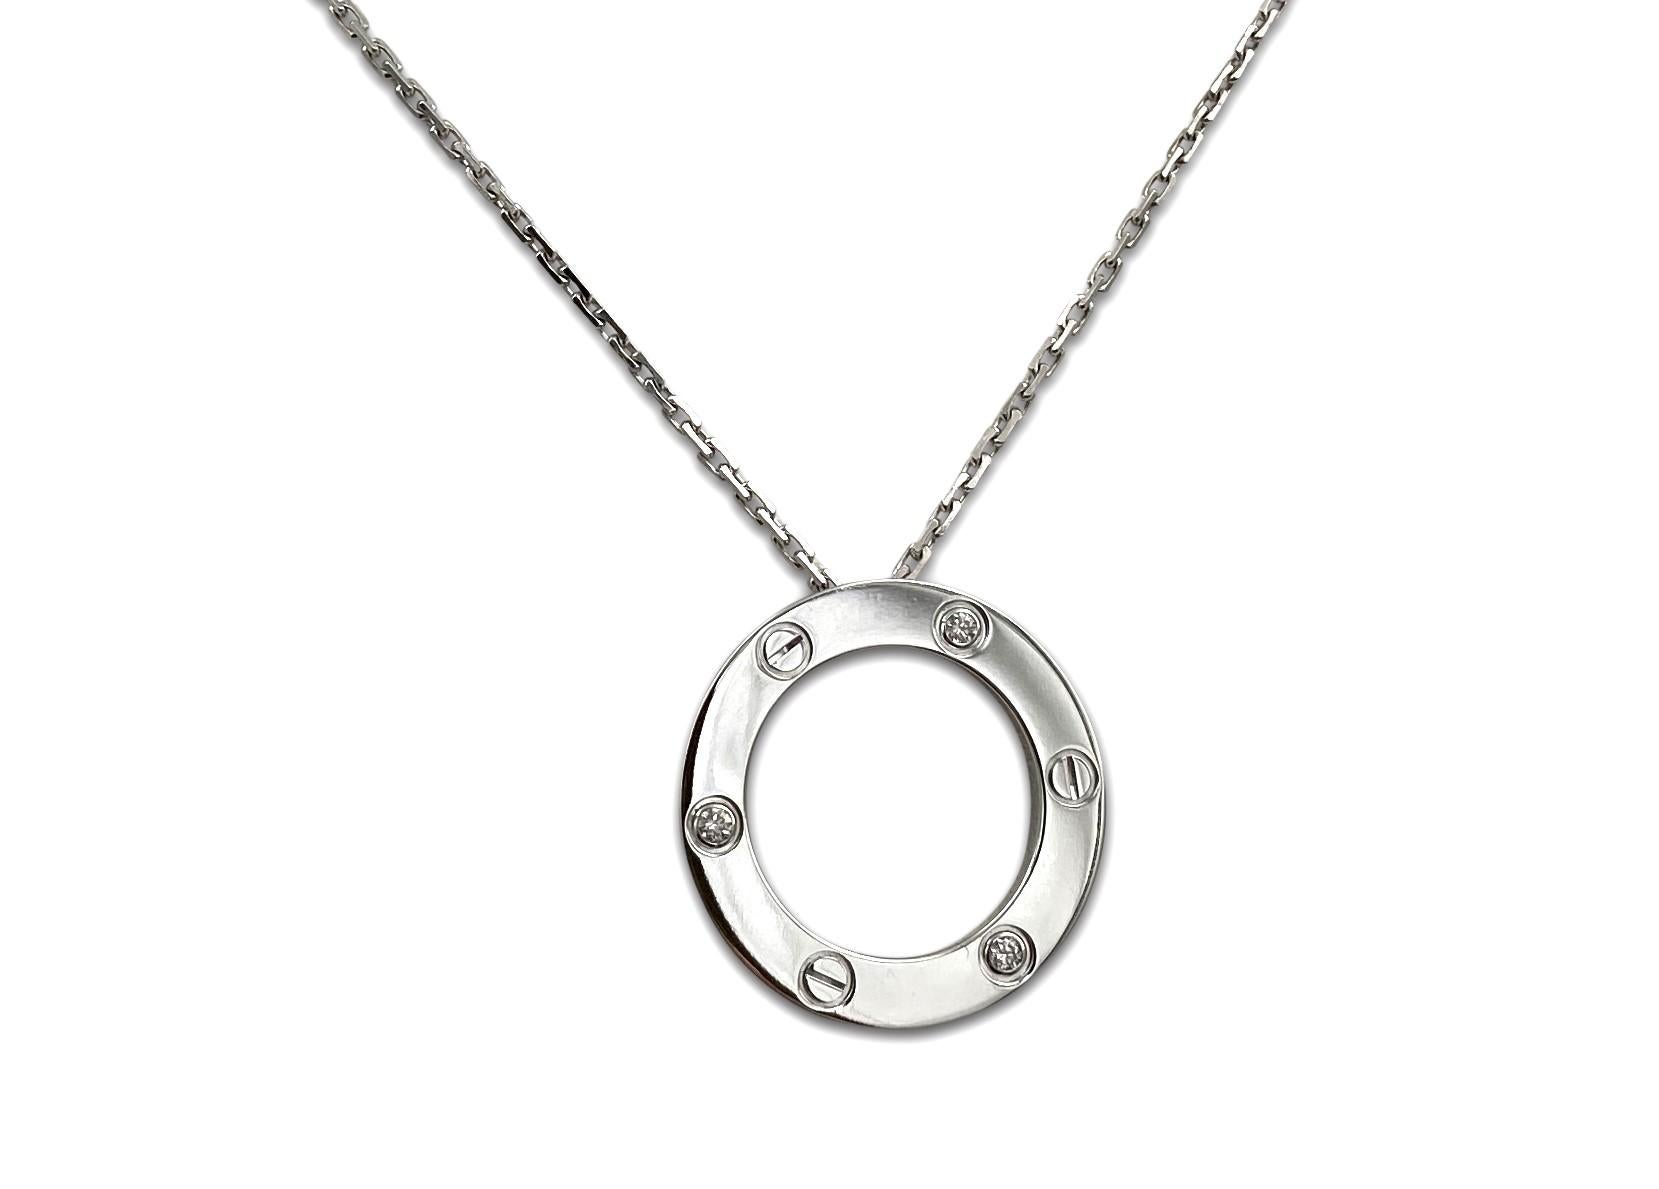 Authentic chain and ring charm necklace from the Cartier Love collection. Made in 18 karat white gold and oval link chain with a half-inch round ring and screw top motifs set with 3 round brilliant cut diamonds (F color, VS clarity) of approximately